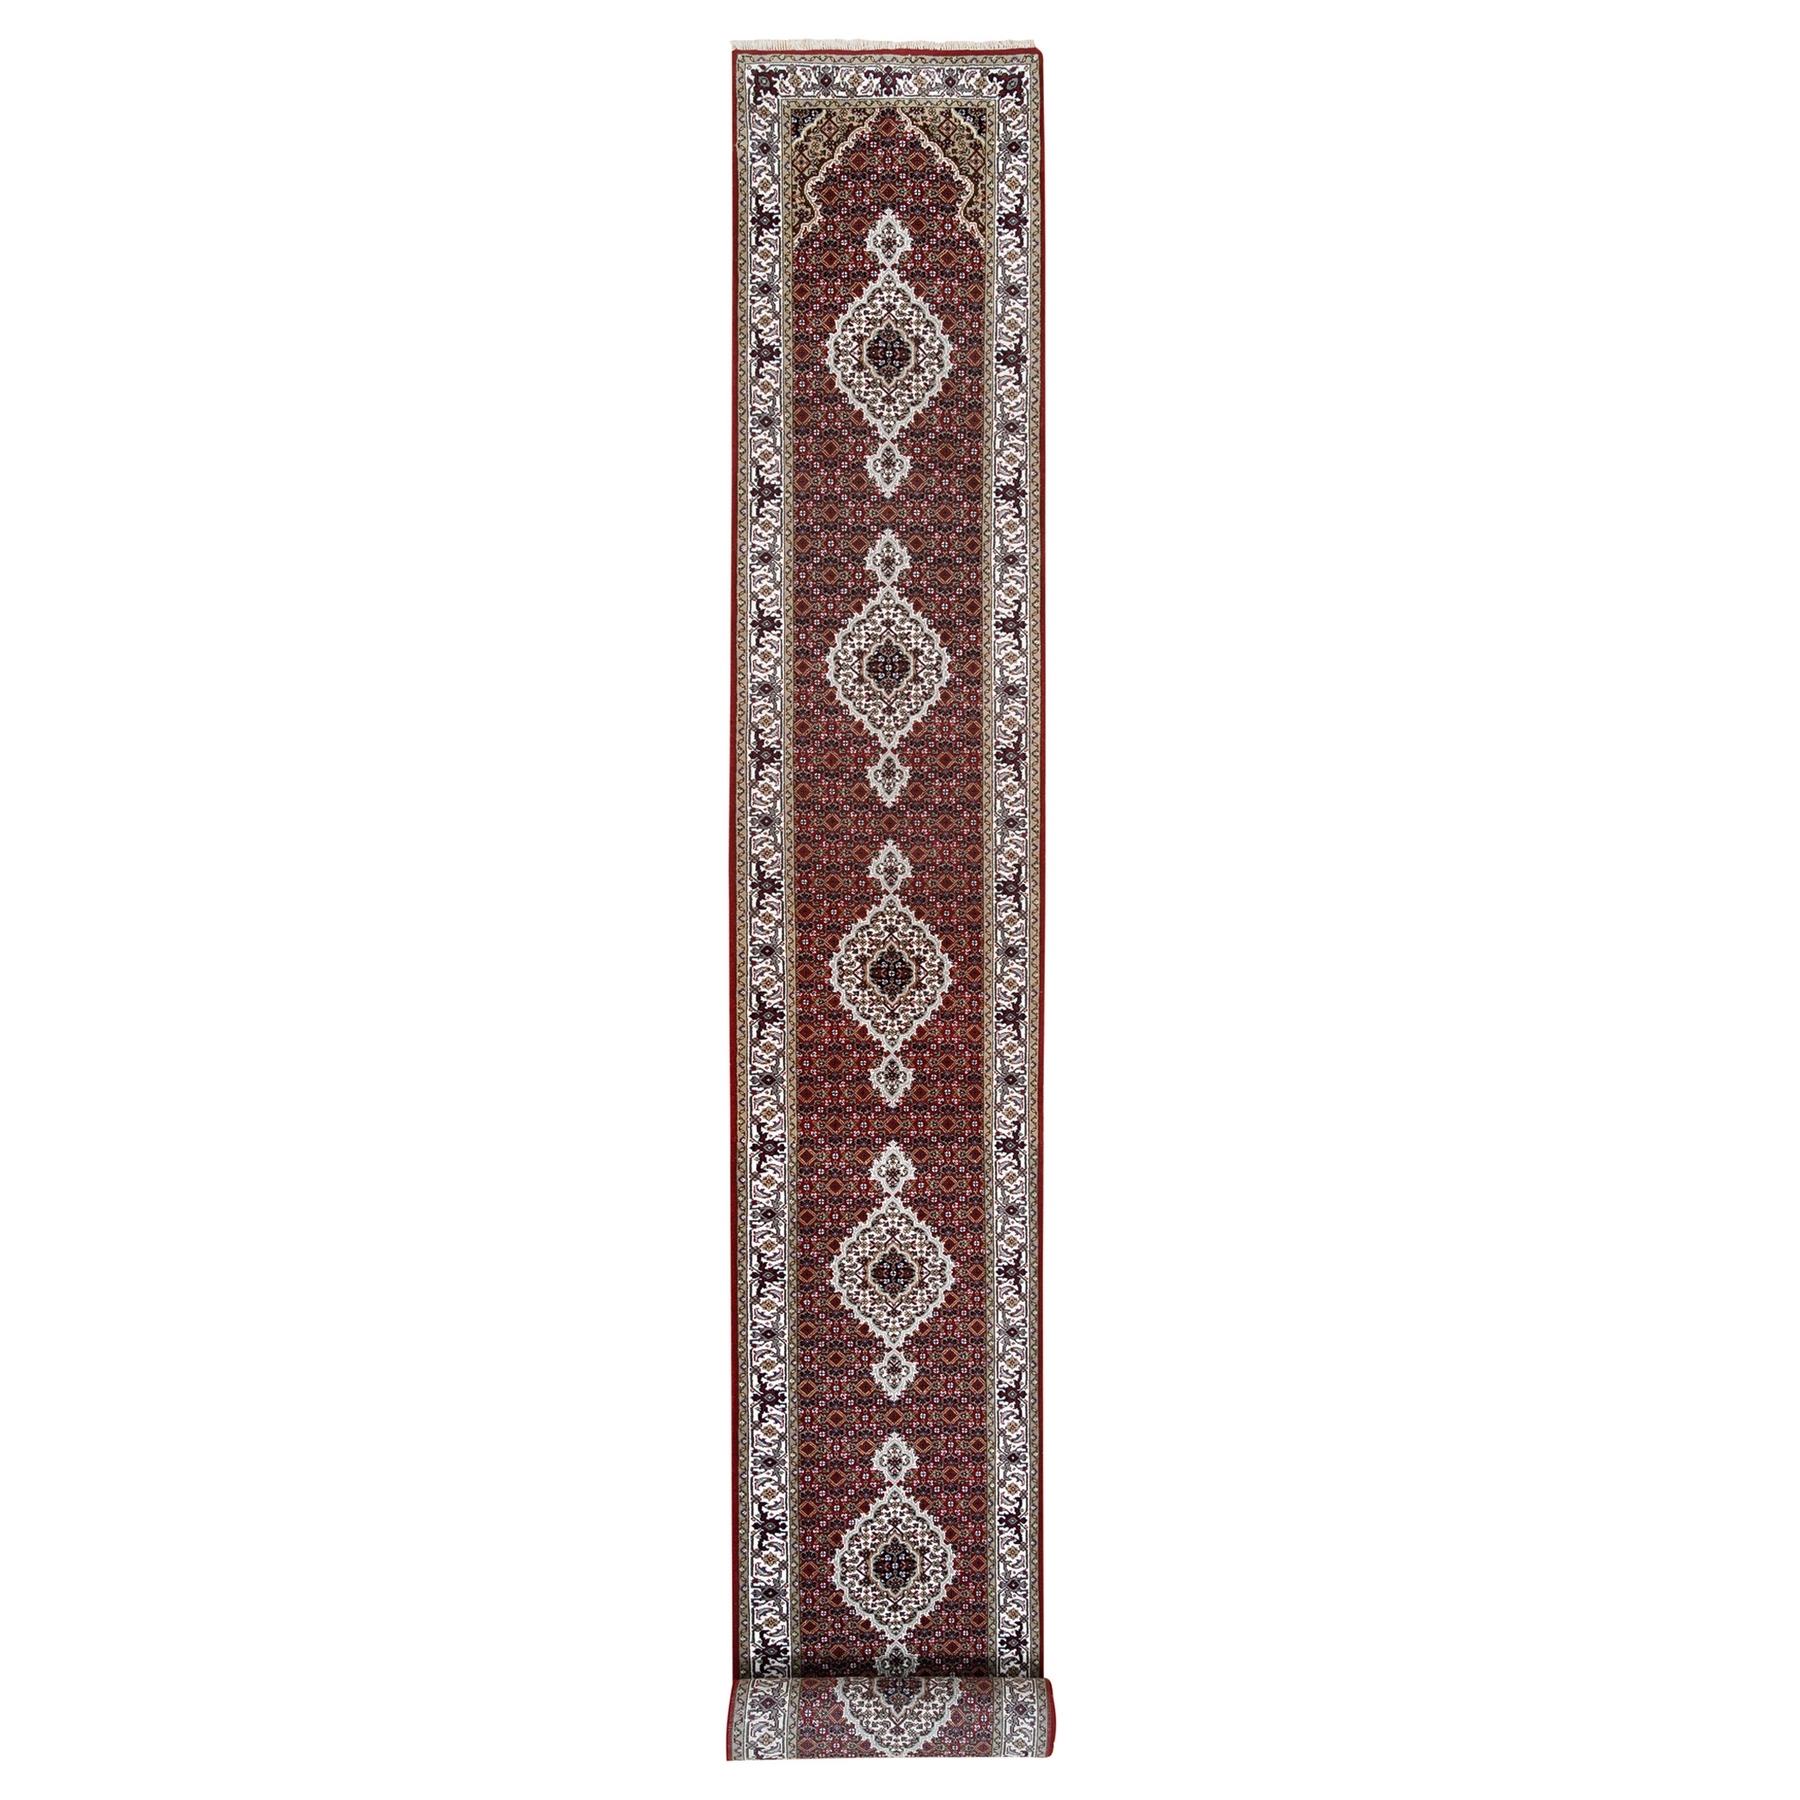 Pirniakan Collection Hand Knotted Red Rug No: 1125018